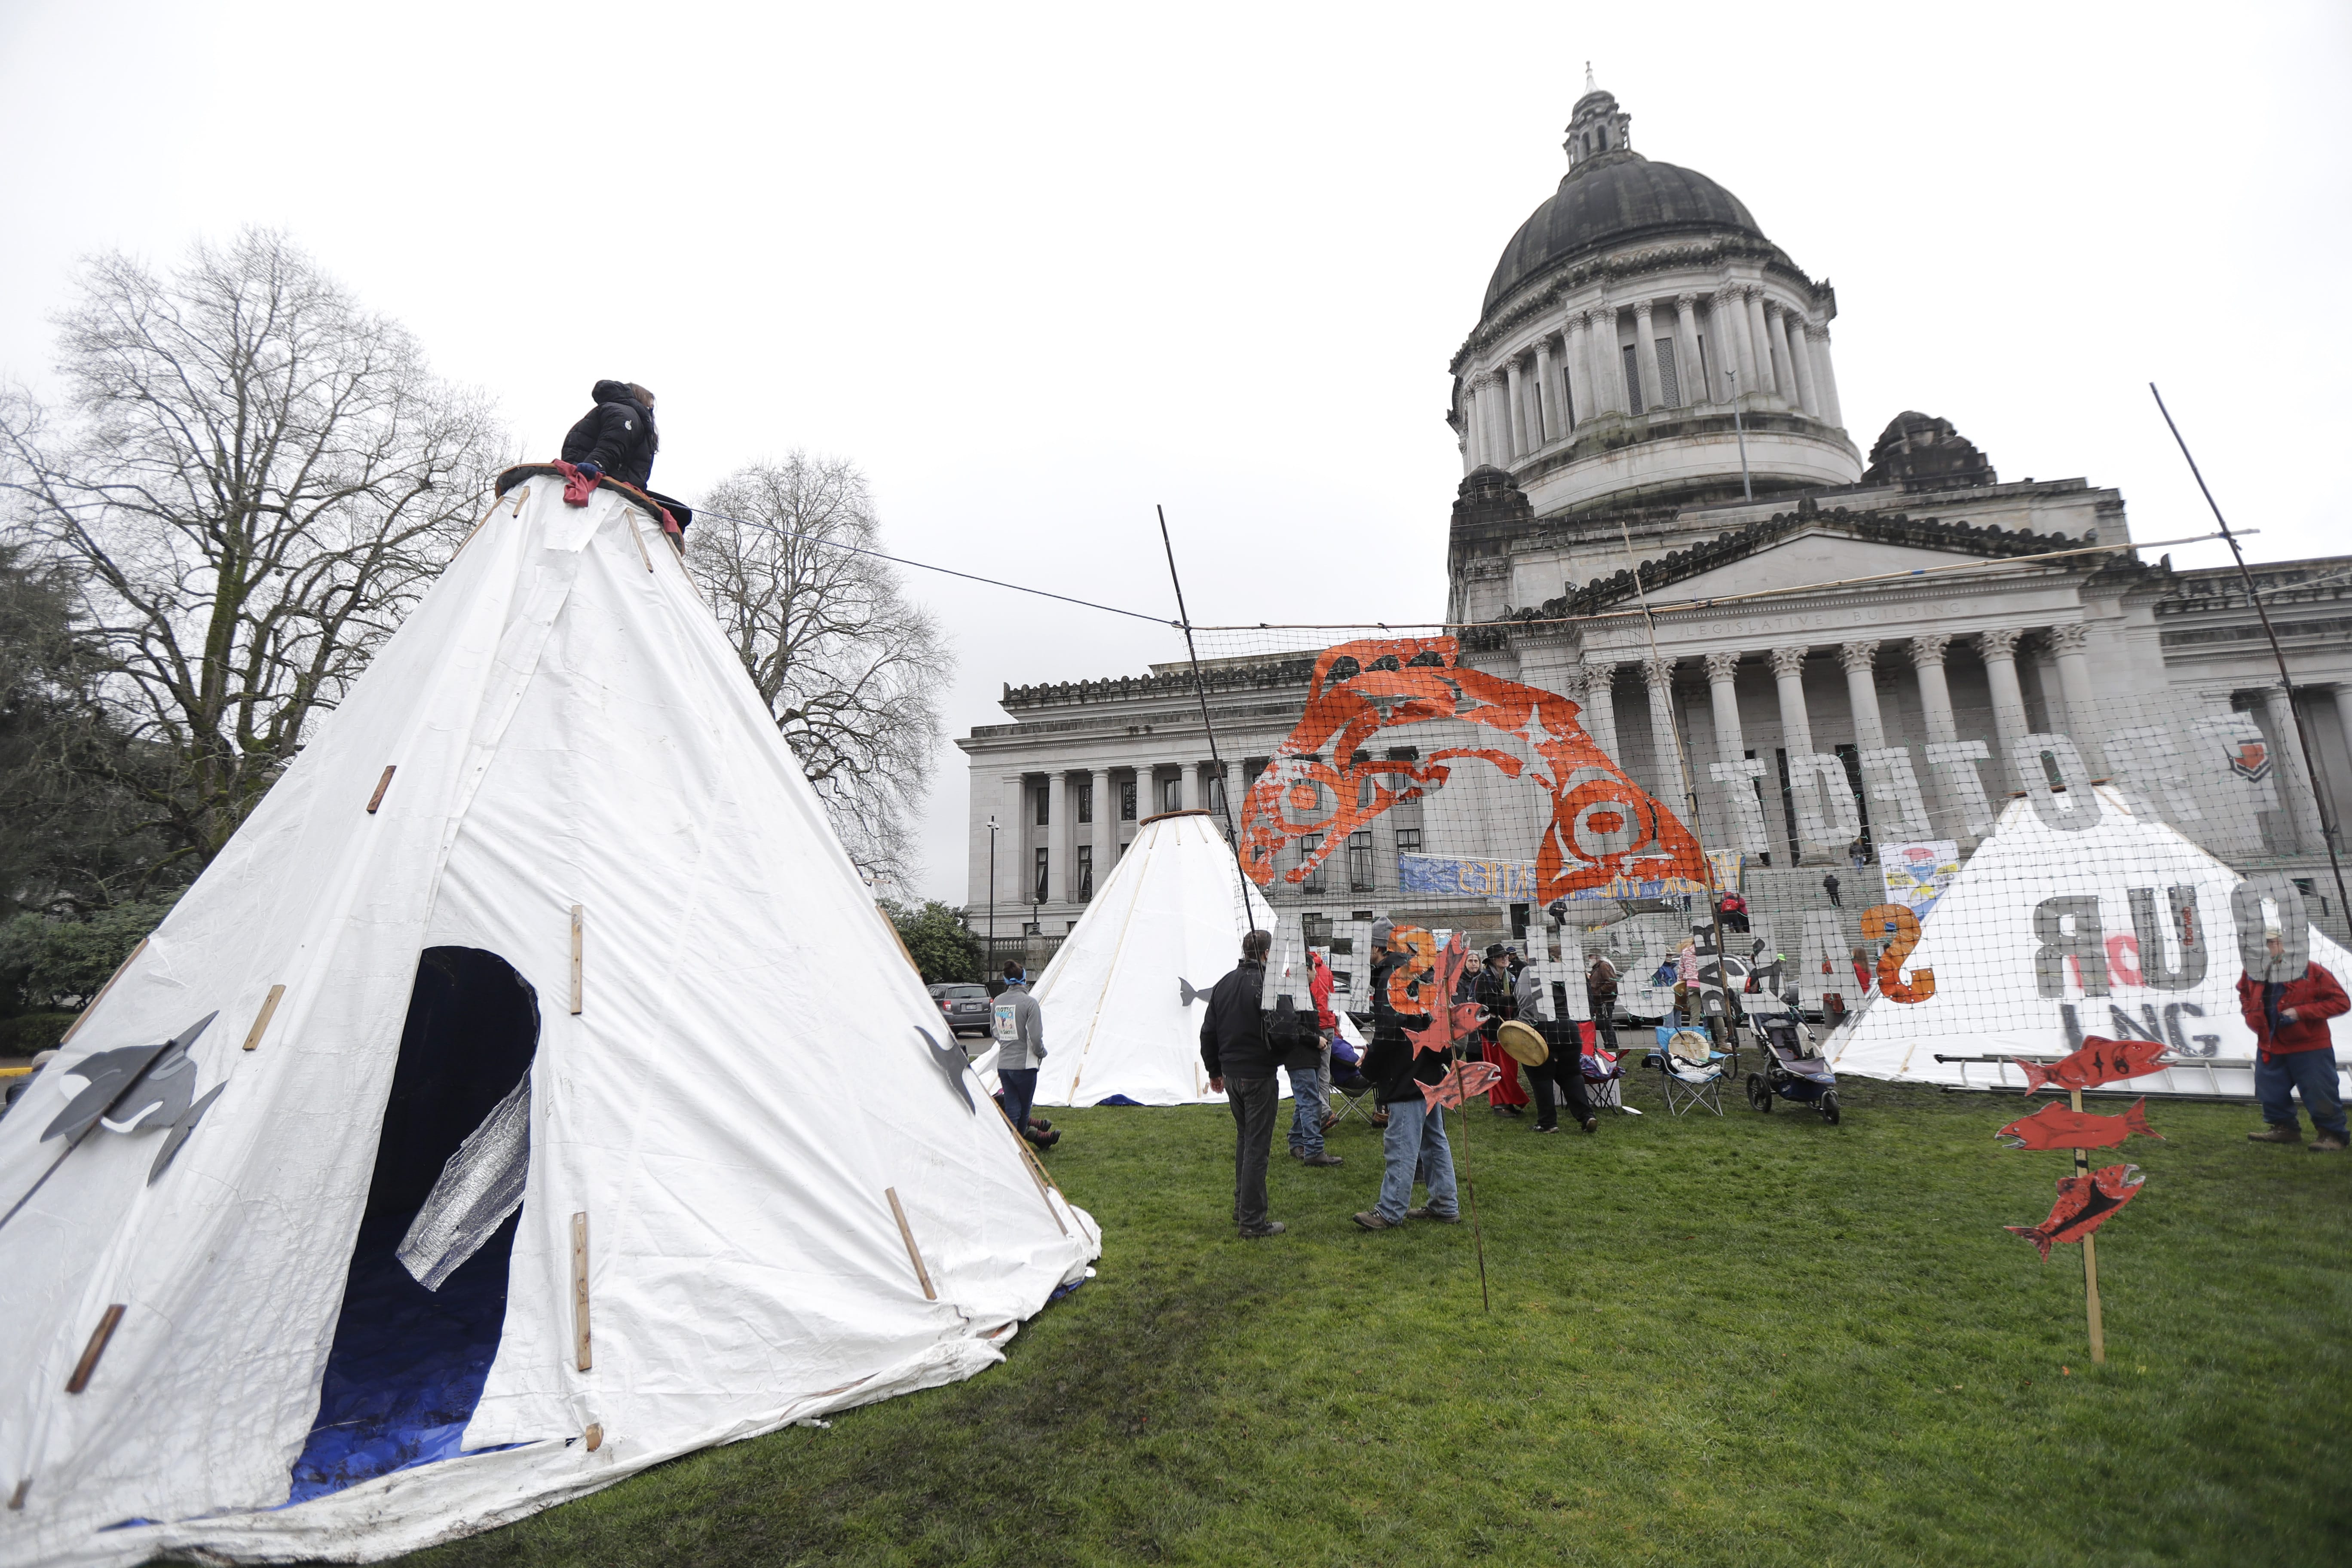 Activists gather around structures erected on a grassy area in front of the Legislative building at the Capitol in Olympia, Wash., Monday, Jan. 8, 2018, the first day of the 2018 legislative session. The structures were part of a day of demonstrations by several groups from across the state supporting climate-change and environmental issues. (AP Photo/Ted S.